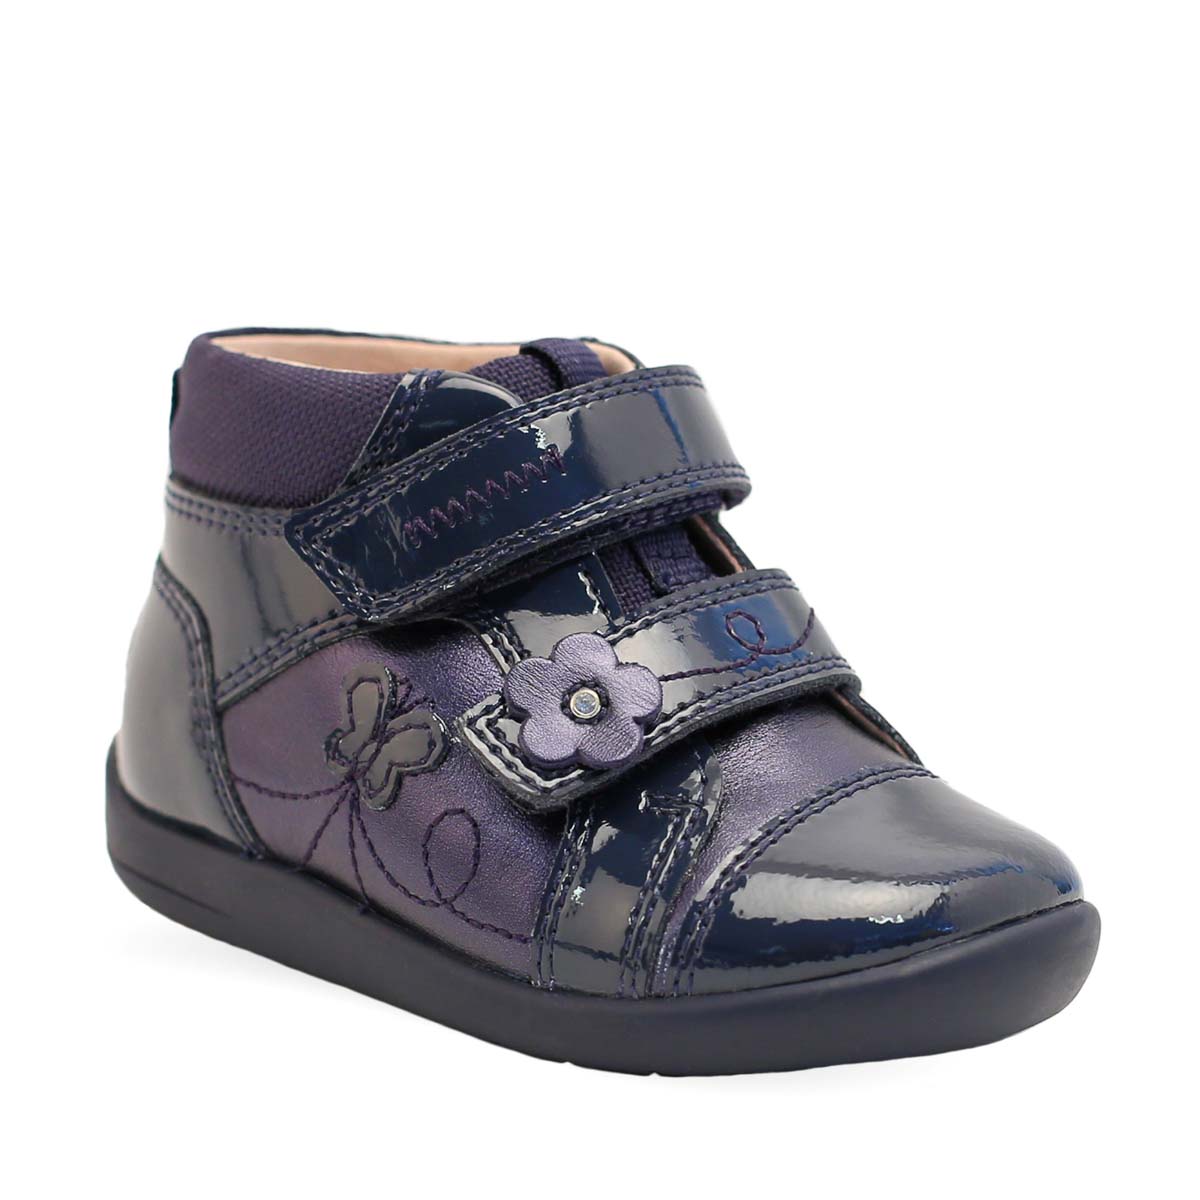 Start Rite - Daydream 2V In Navy Patent 0792-96F In Size 5.5 In Plain Navy Patent Infant Girls Boots  In Navy Patent For kids